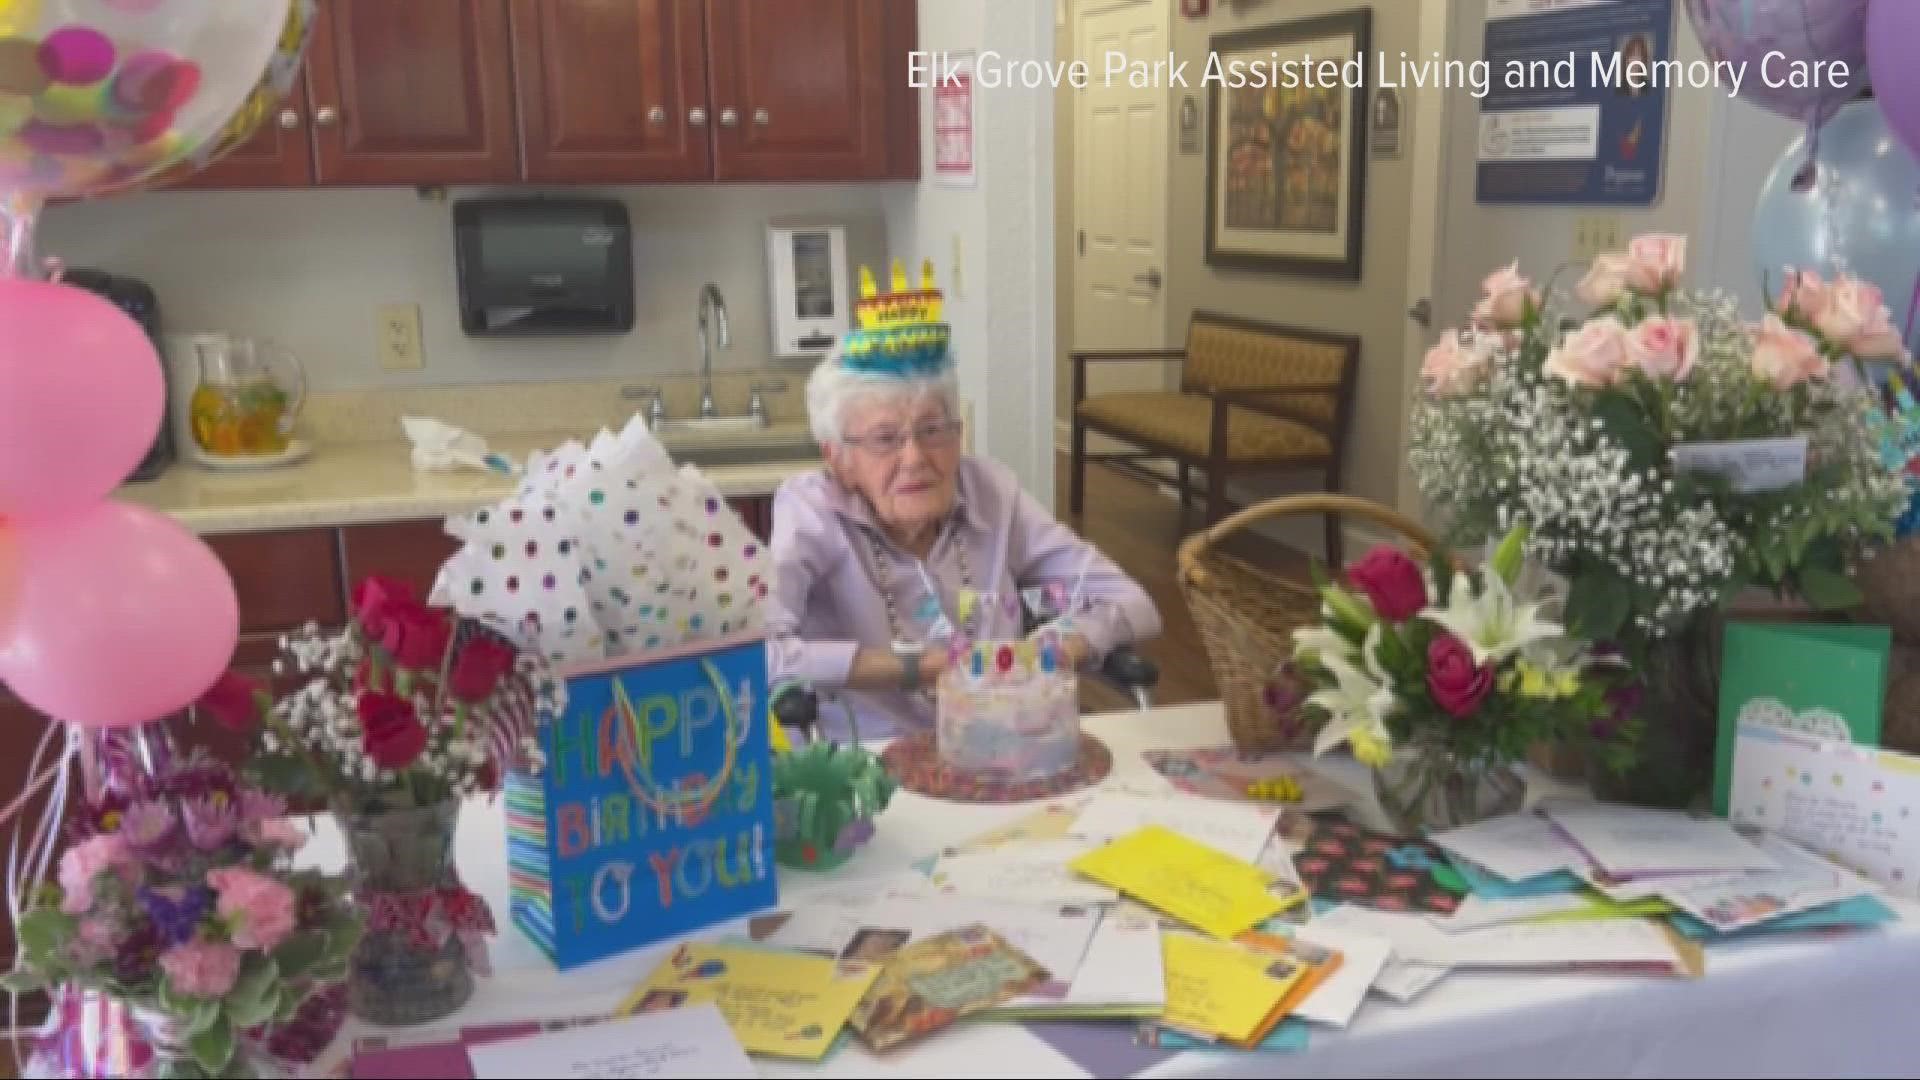 Elk Grove Park Assisted Living and Memory Care staff members said they wanted to give a birthday shout out to Orsula Hanna from Elk Grove for her 105th birthday.